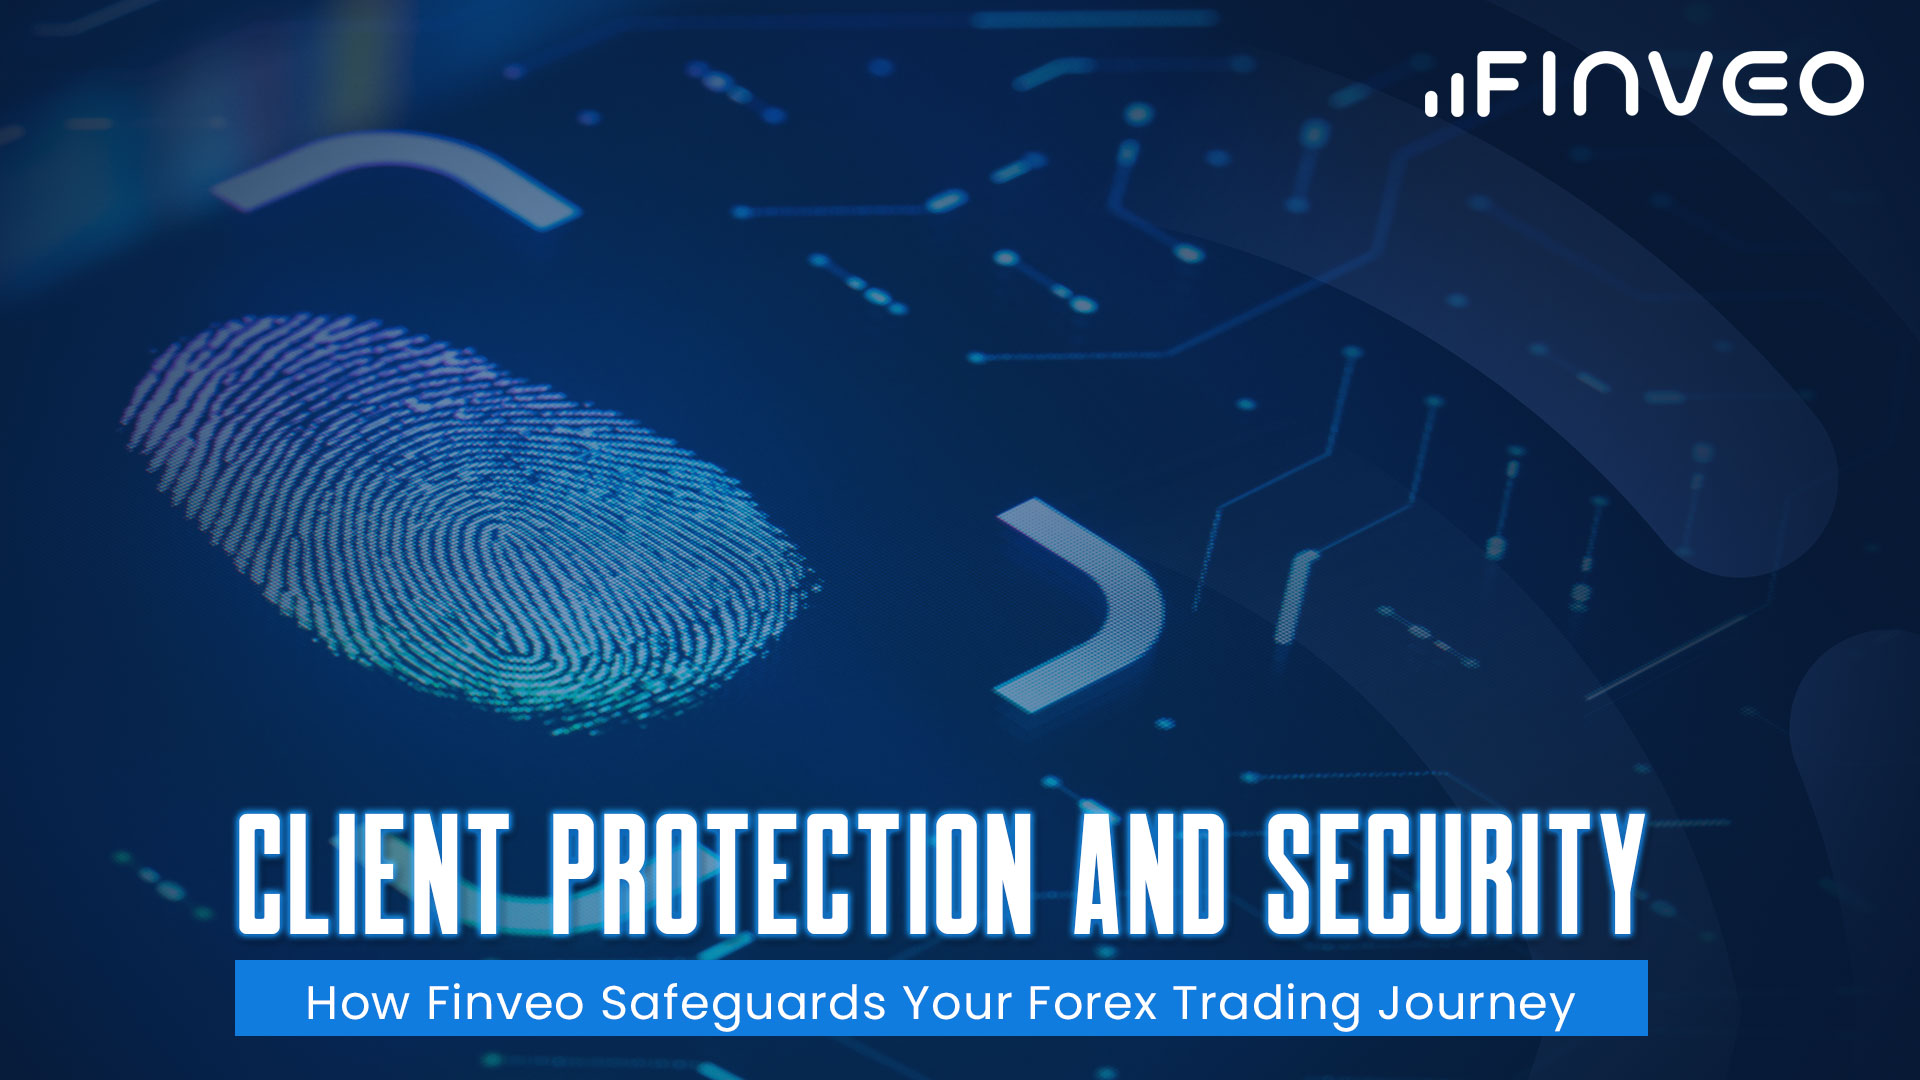 Ensuring Client Protection and Security: How Finveo Safeguards Your Forex Trading Journey